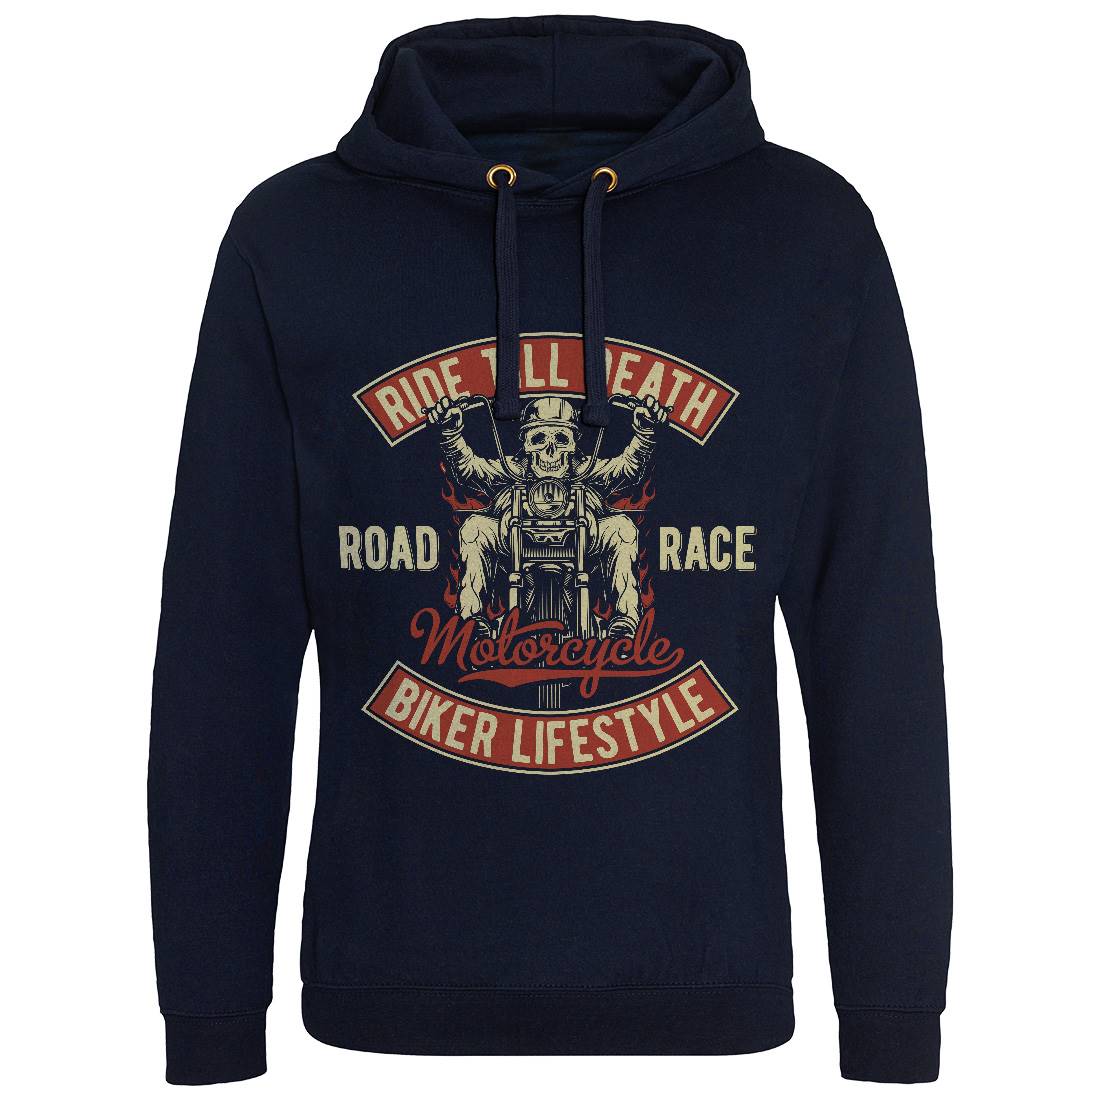 Ride Till Death Mens Hoodie Without Pocket Motorcycles B857